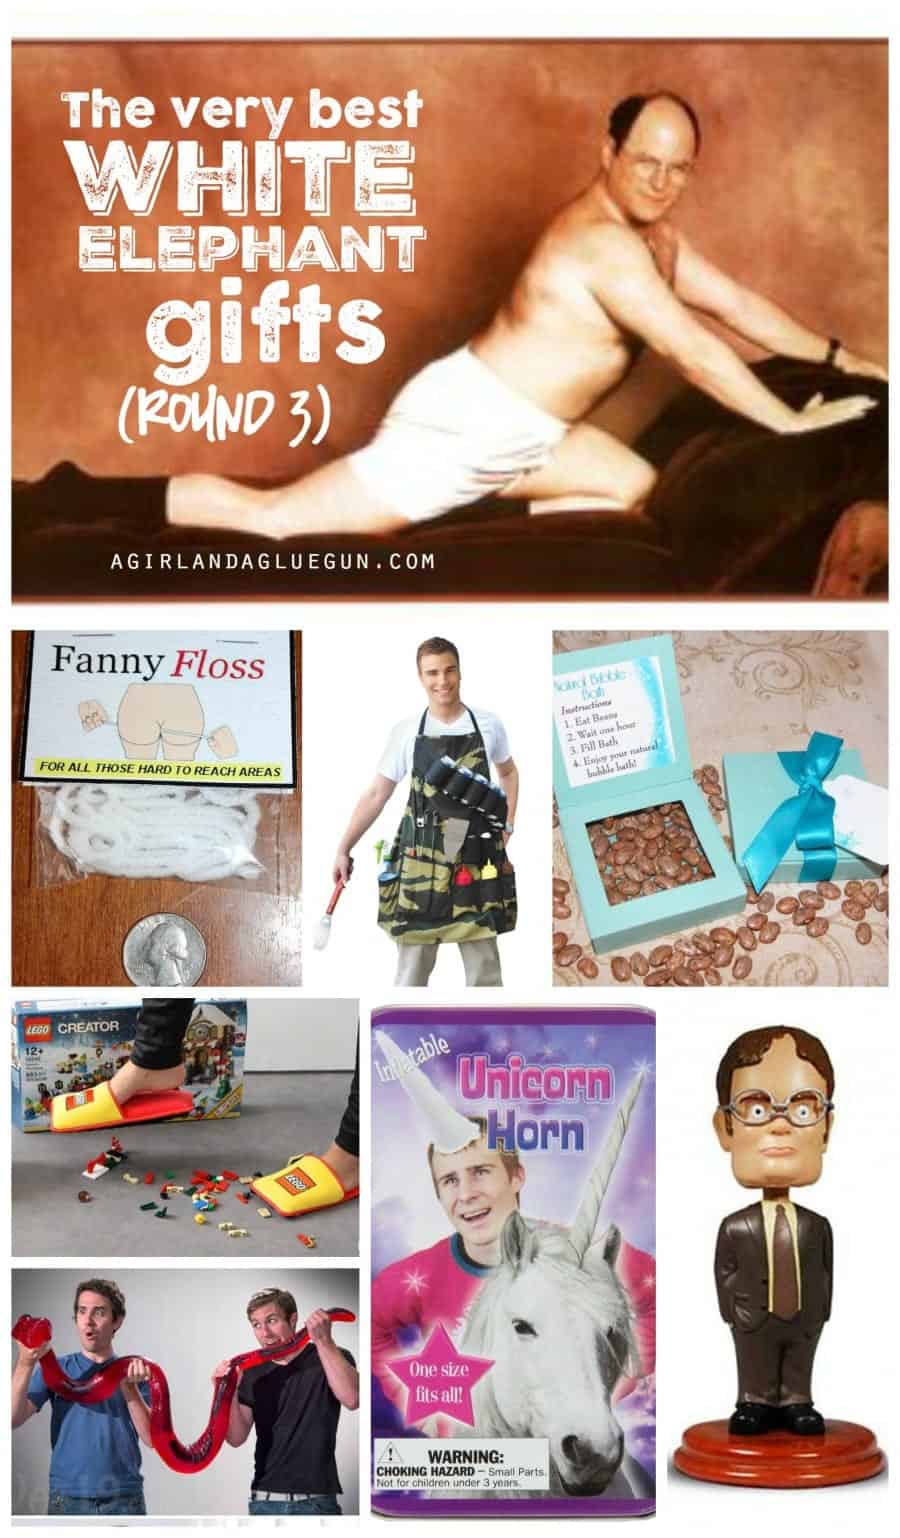 The very best white elephant gifts roundup! so many funny ideas!